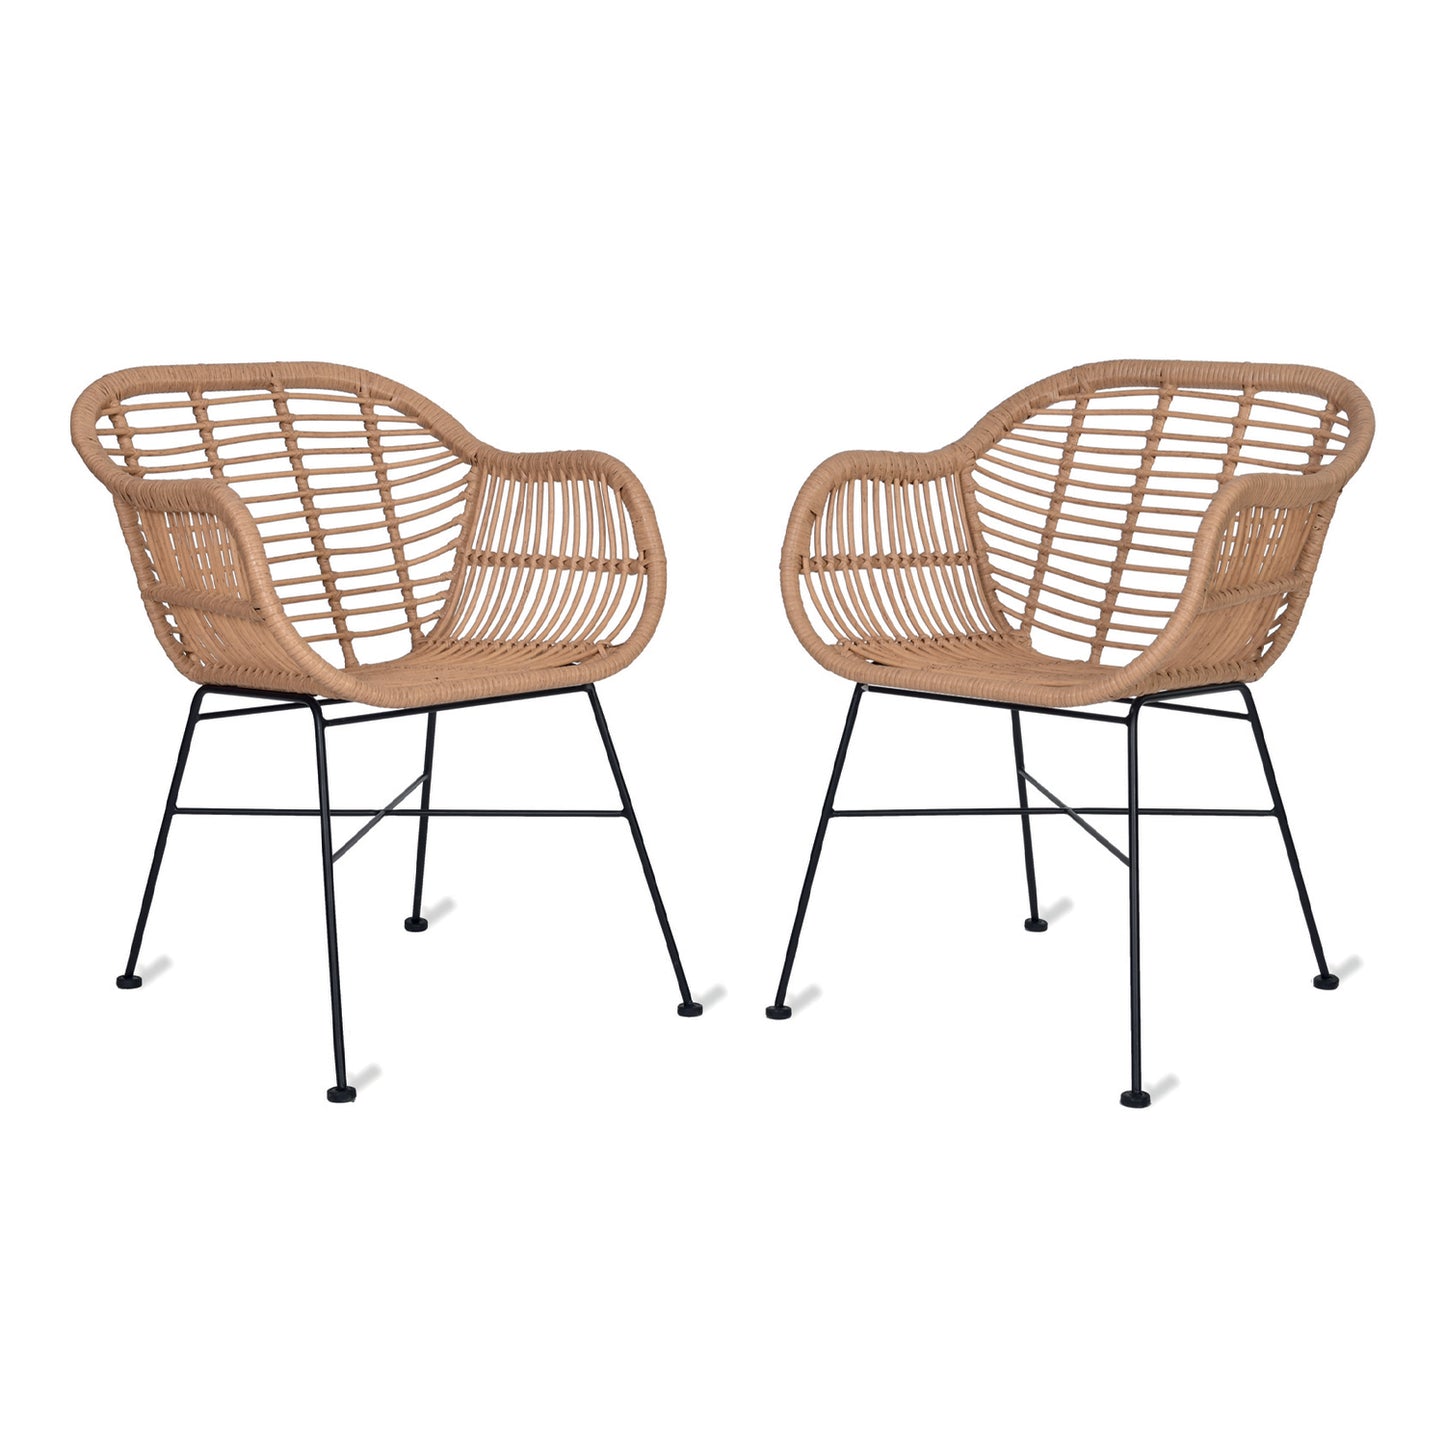 Pair of Hampstead Outdoor Chairs PE Bamboo by Garden Trading